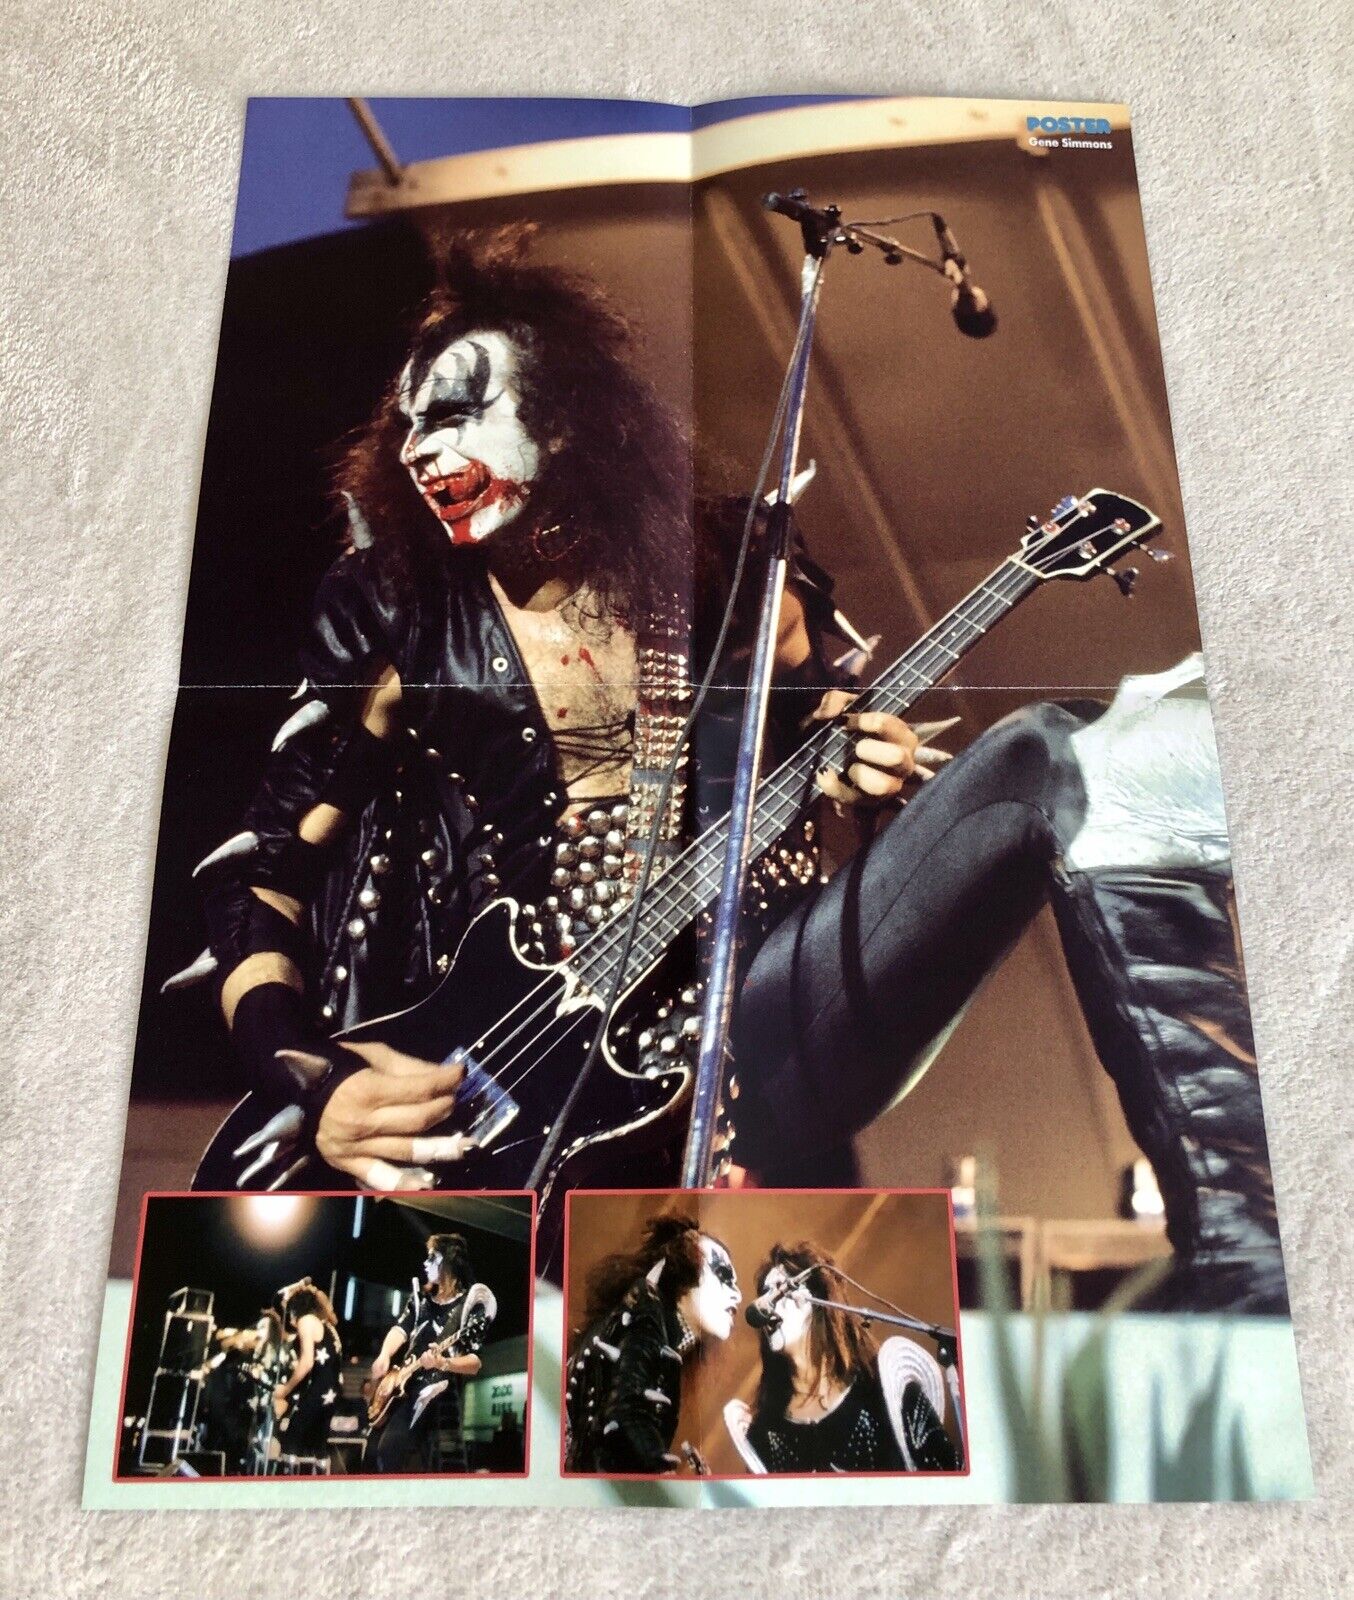 KISS TRIBUTE POSTER - SWEDISH PHOTOS depot MAGAZINE FROM 1976 Max 62% OFF